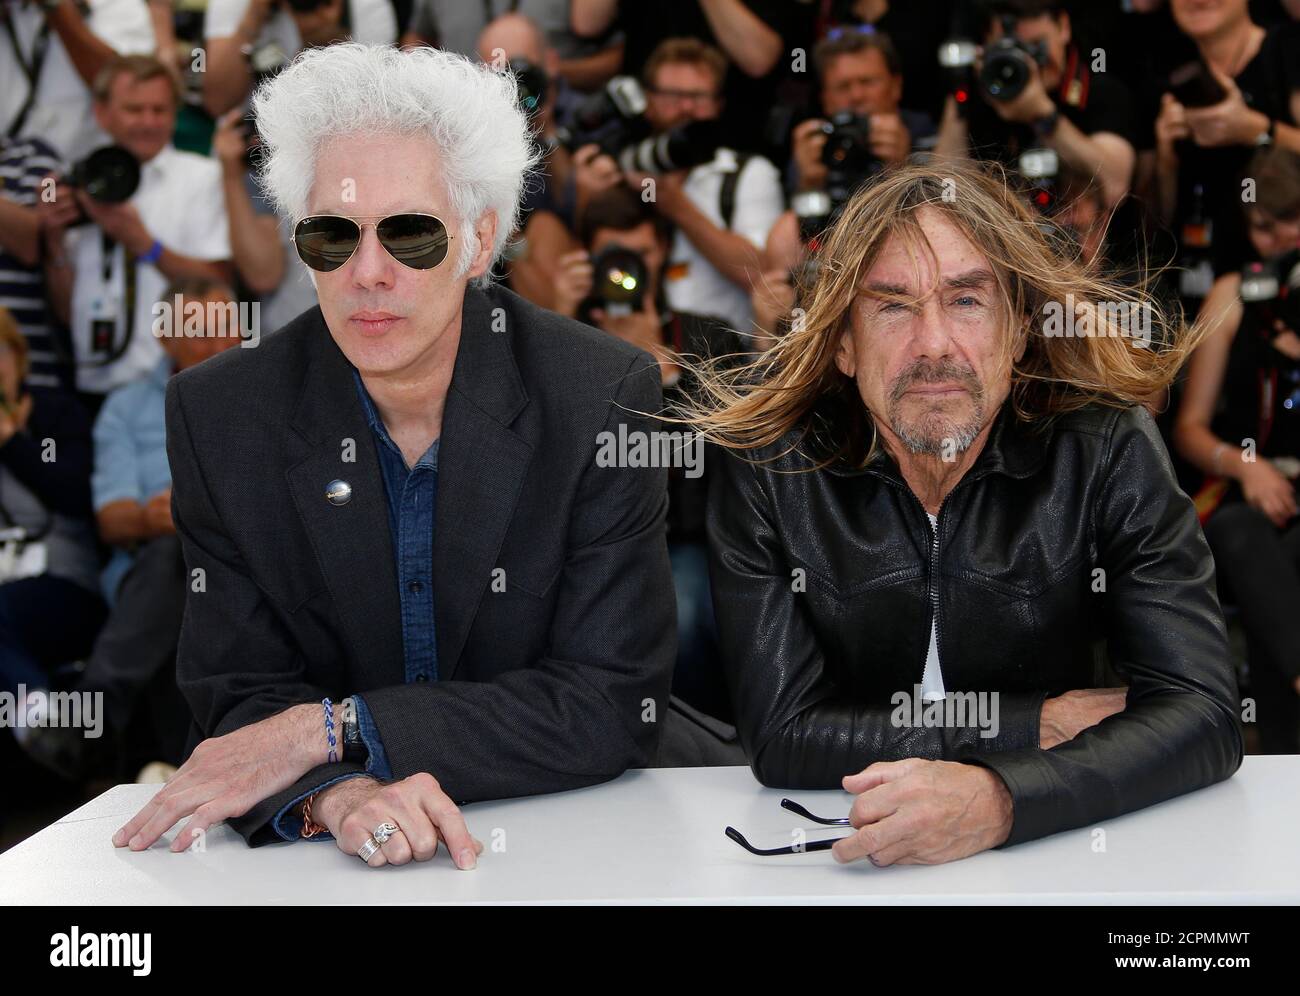 Jim Jarmusch Iggy Pop High Resolution Stock Photography and Images - Alamy